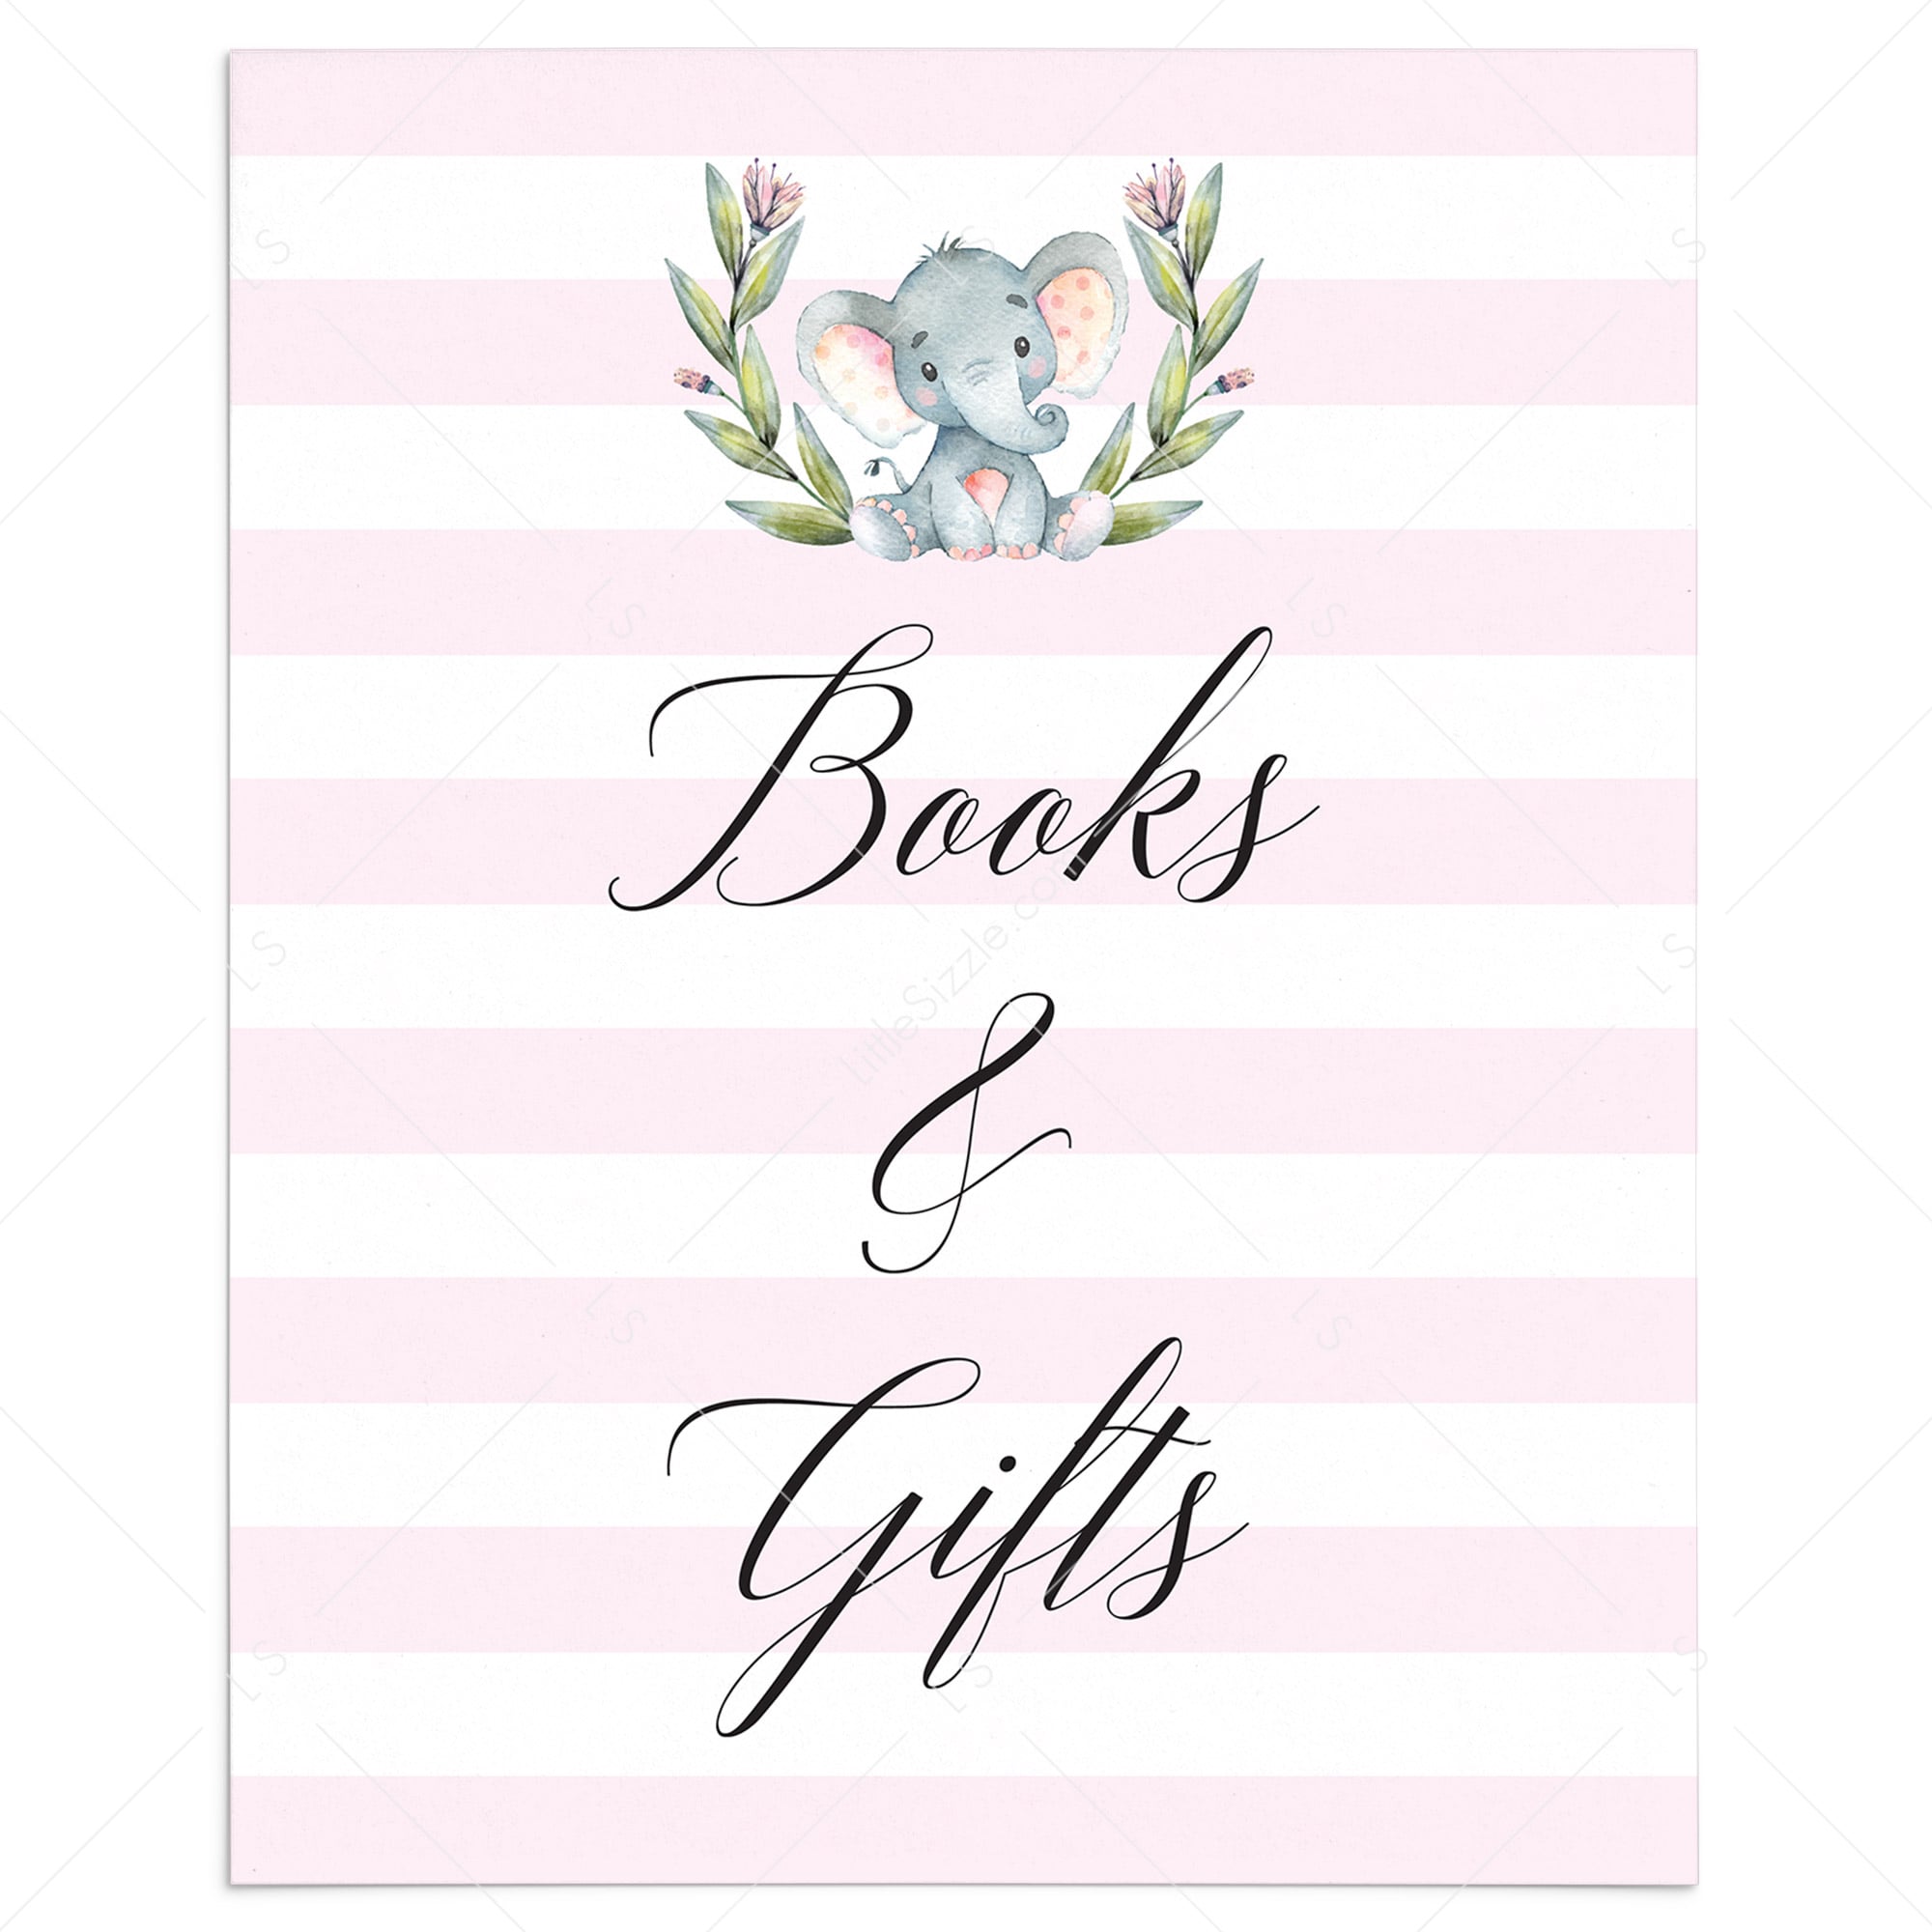 Baby books baby shower signage printable by LittleSizzle